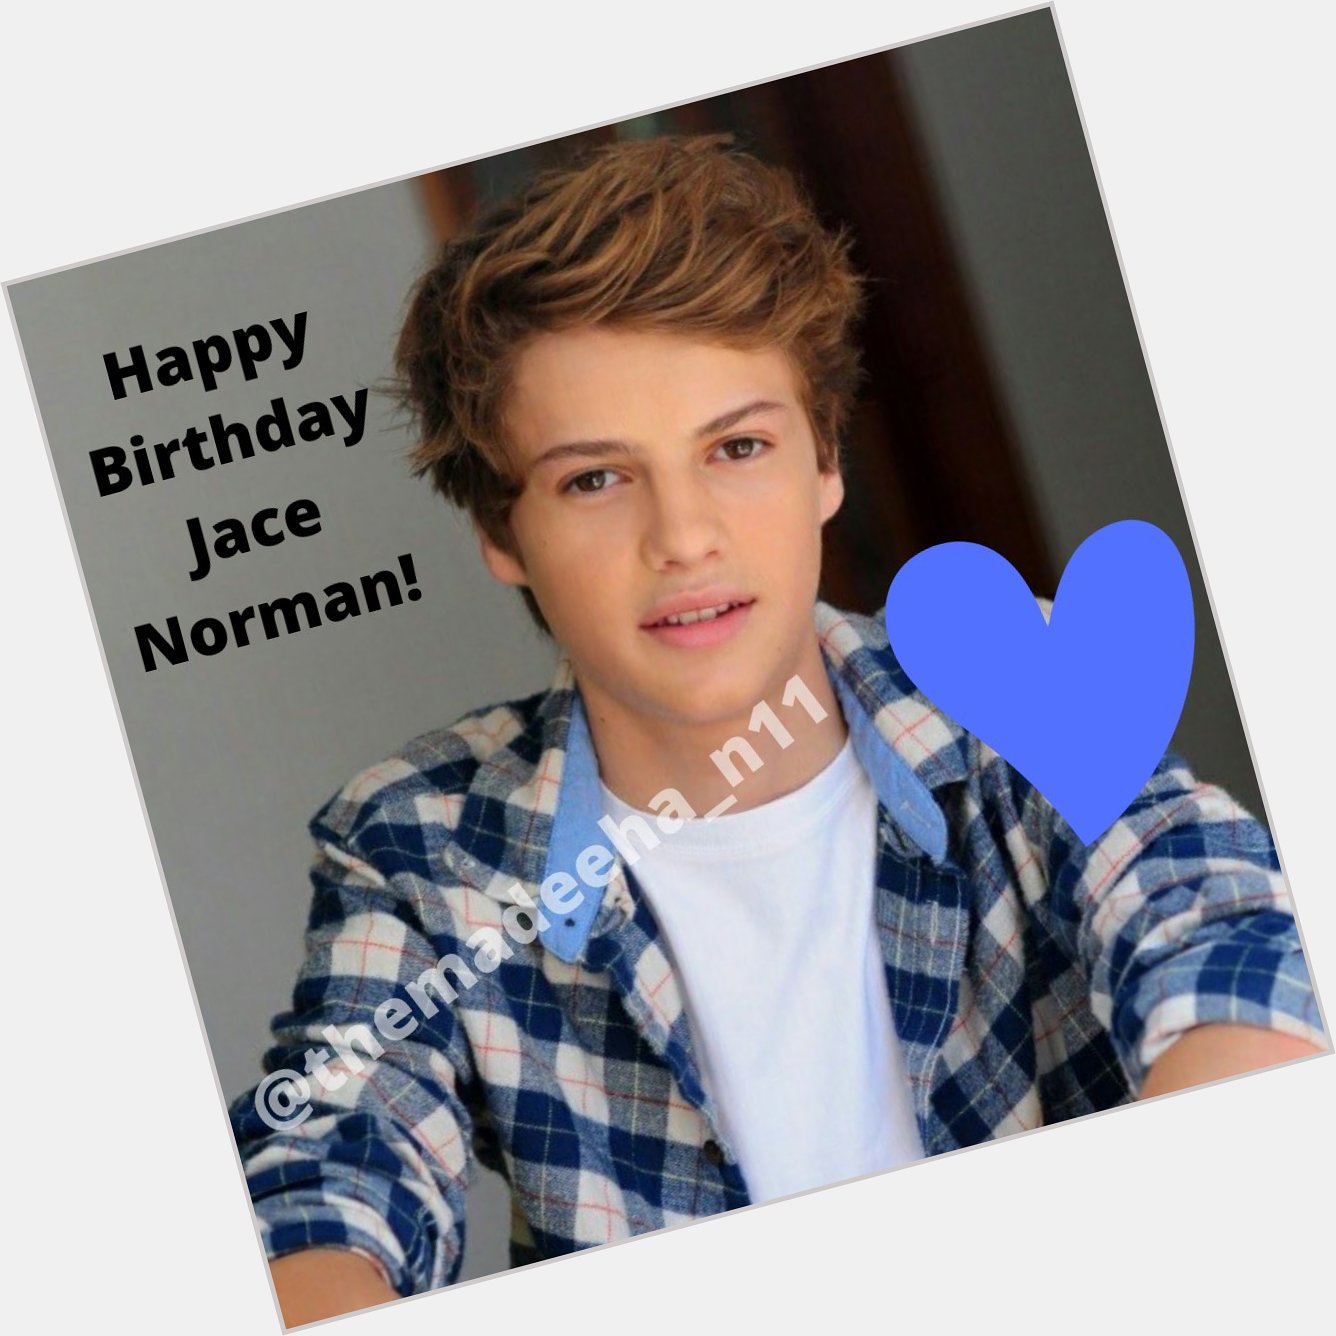 Happy Birthday To You Jace Norman!!! 